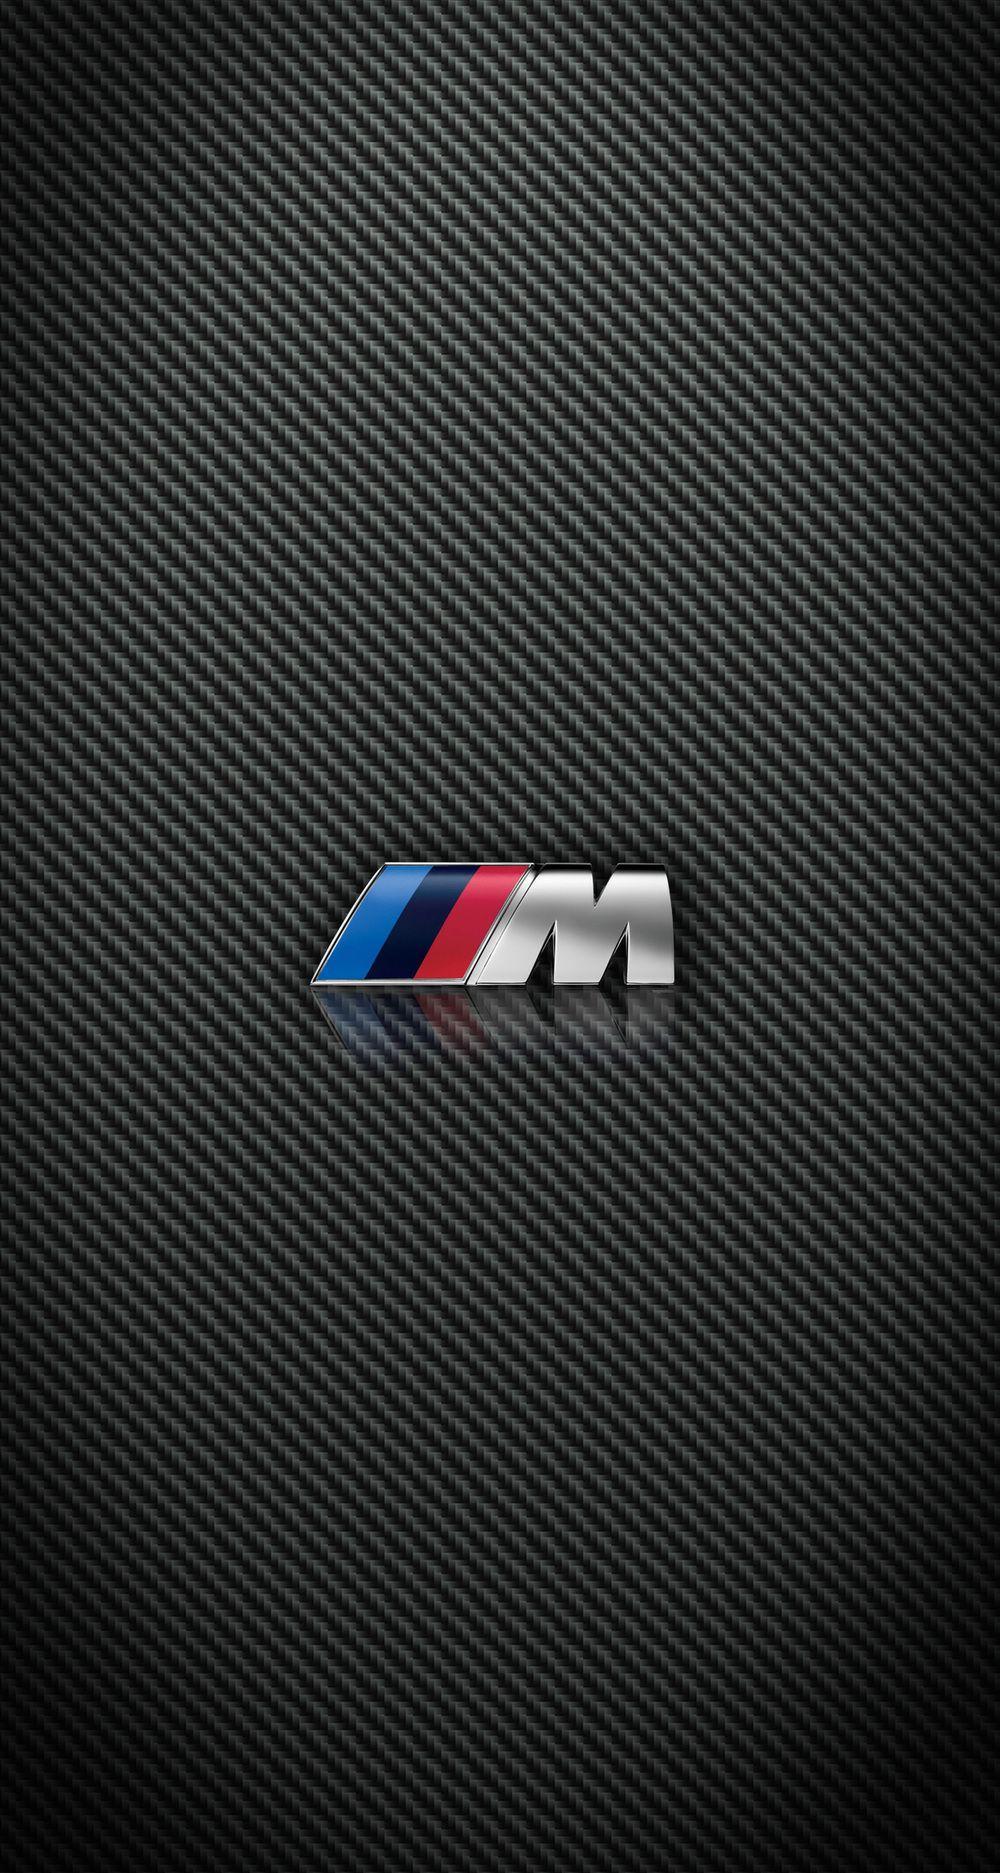 Bmw M Power Wallpapers Wallpaper Cave